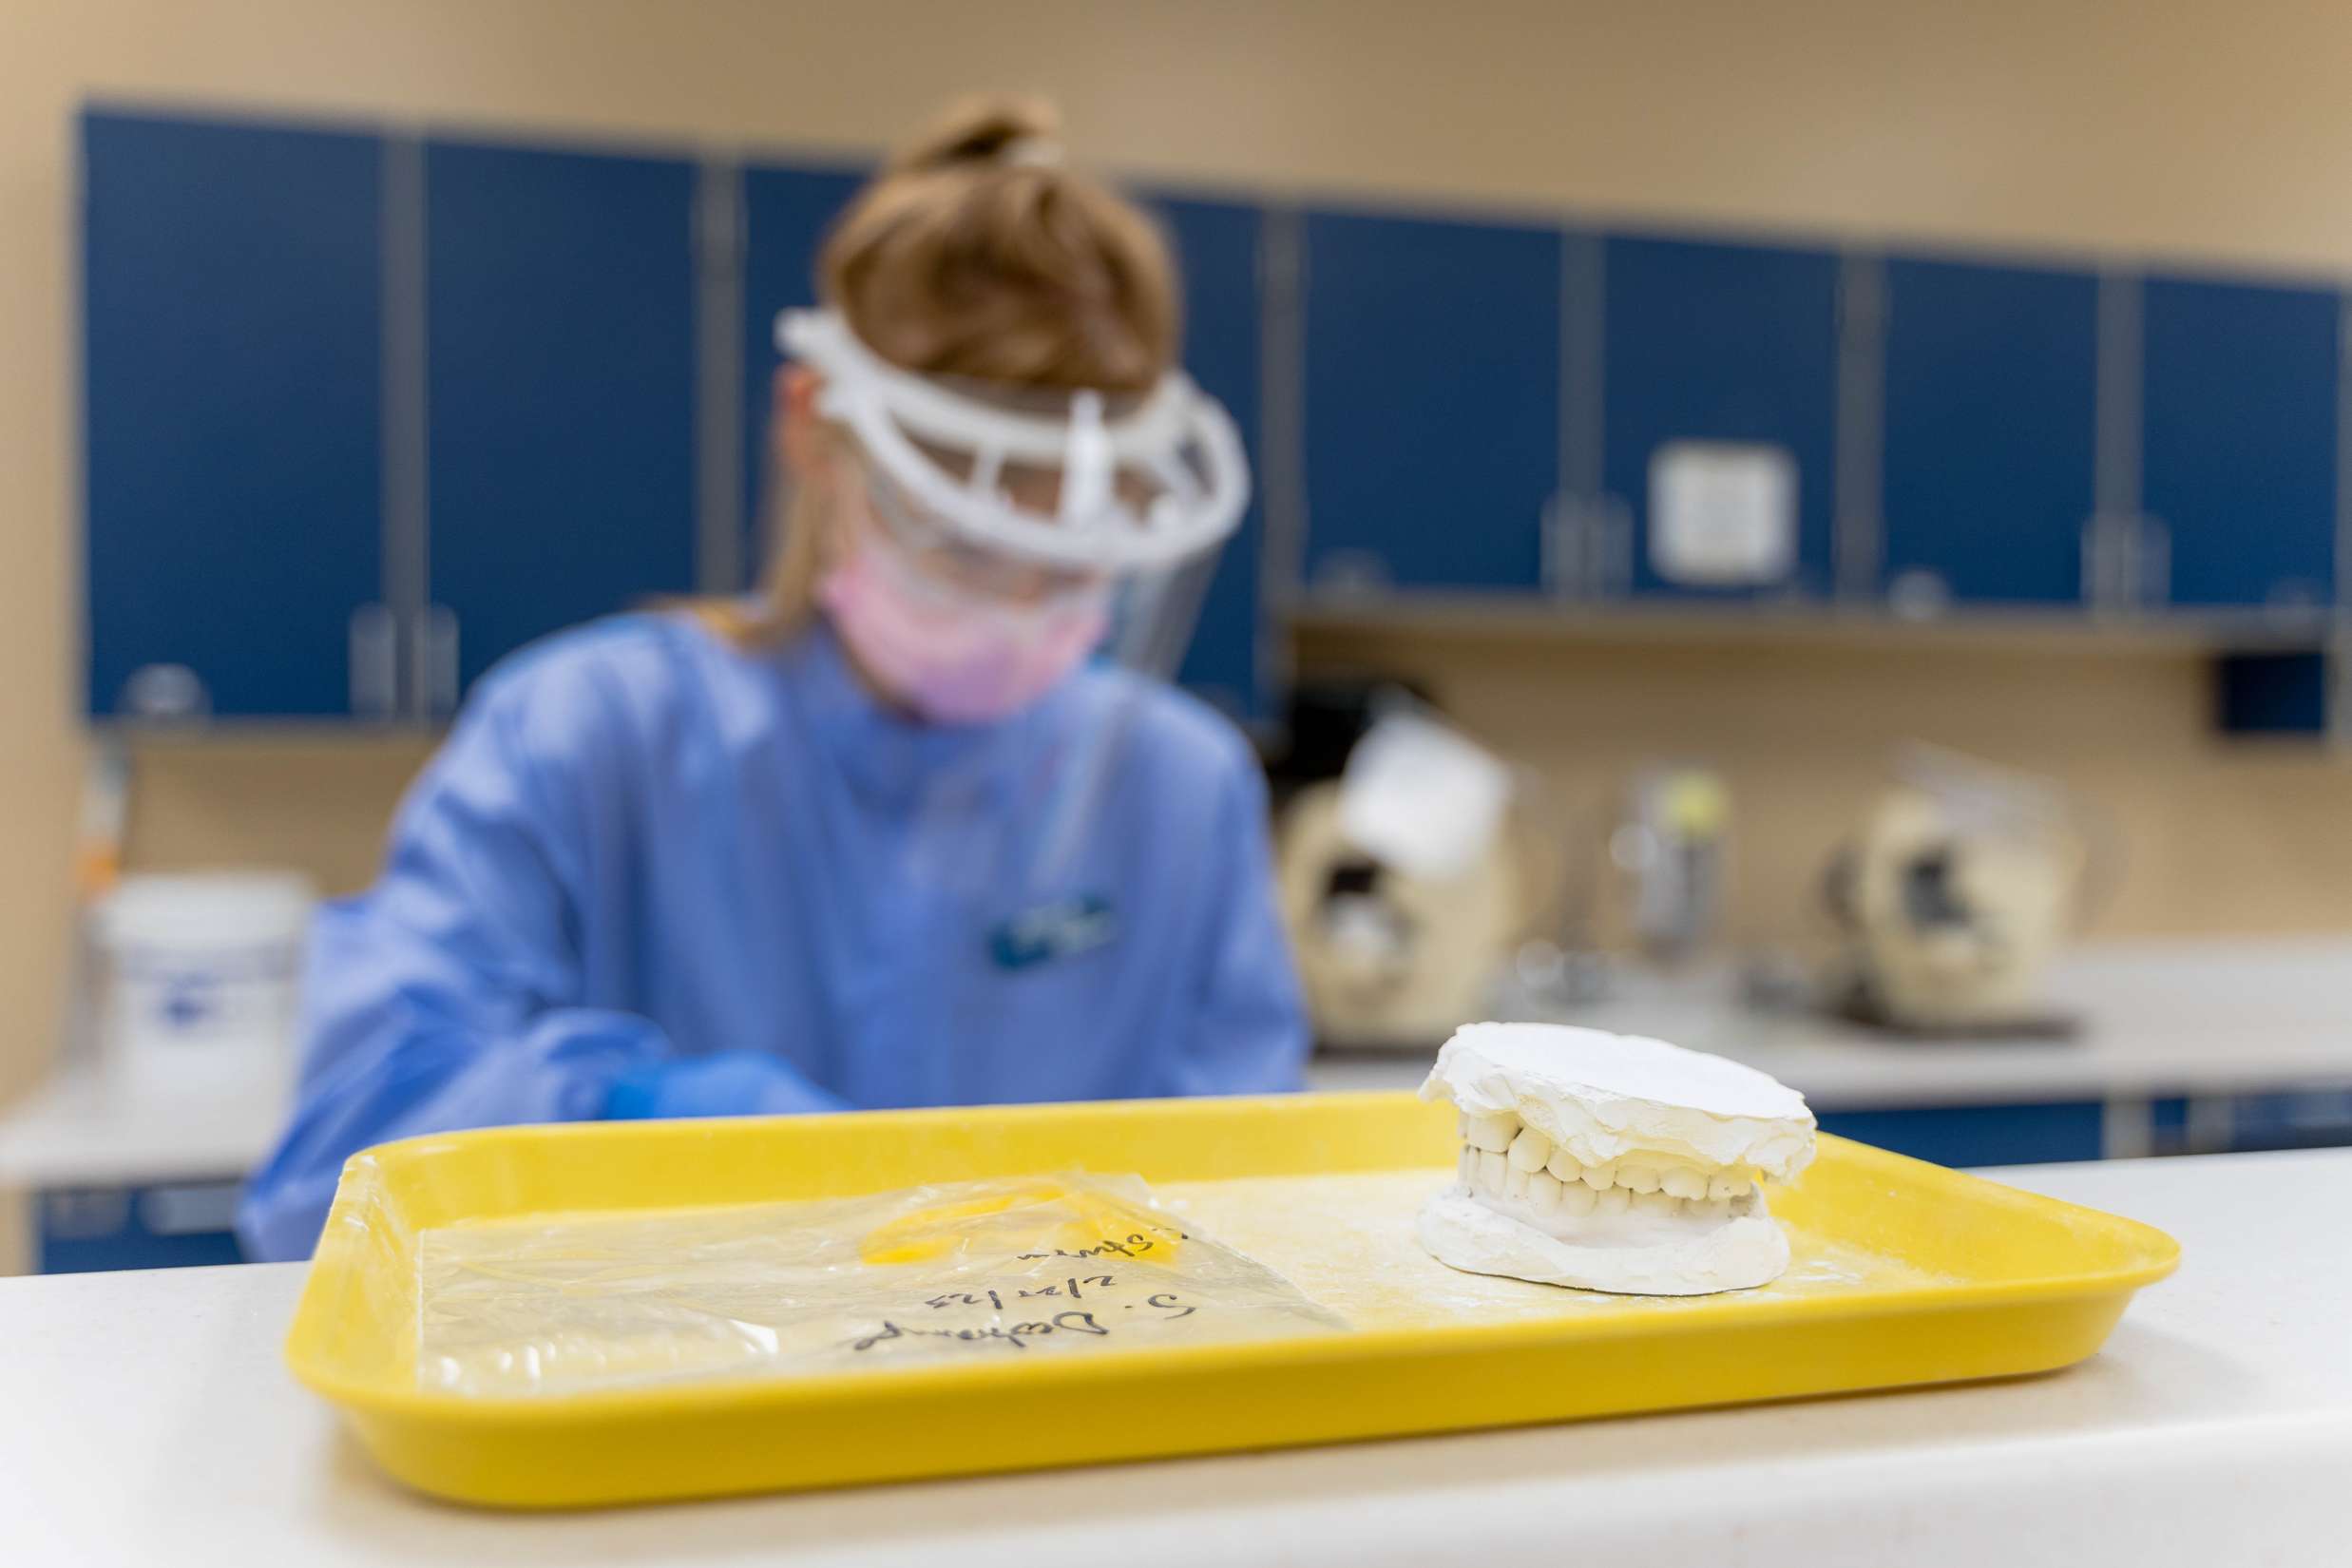 A mold of a patients top and bottom teeth is set out on a tray in front of a dental hygienist.